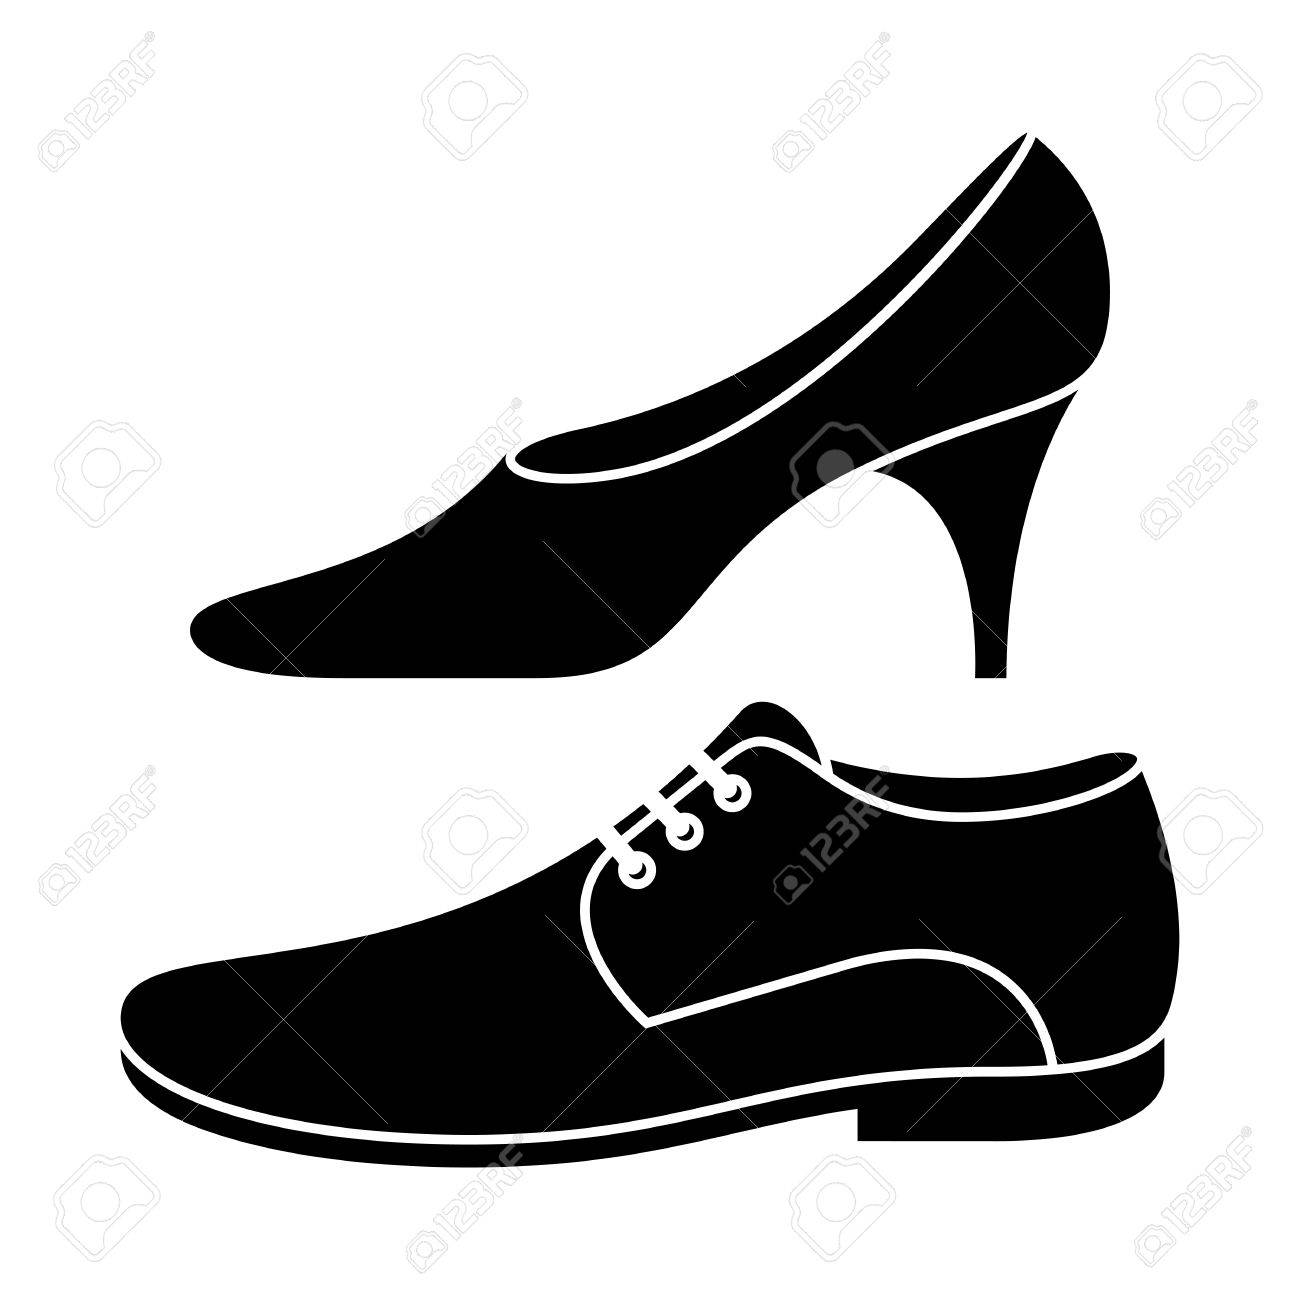 Vector - Women and men shoe isolated on white background